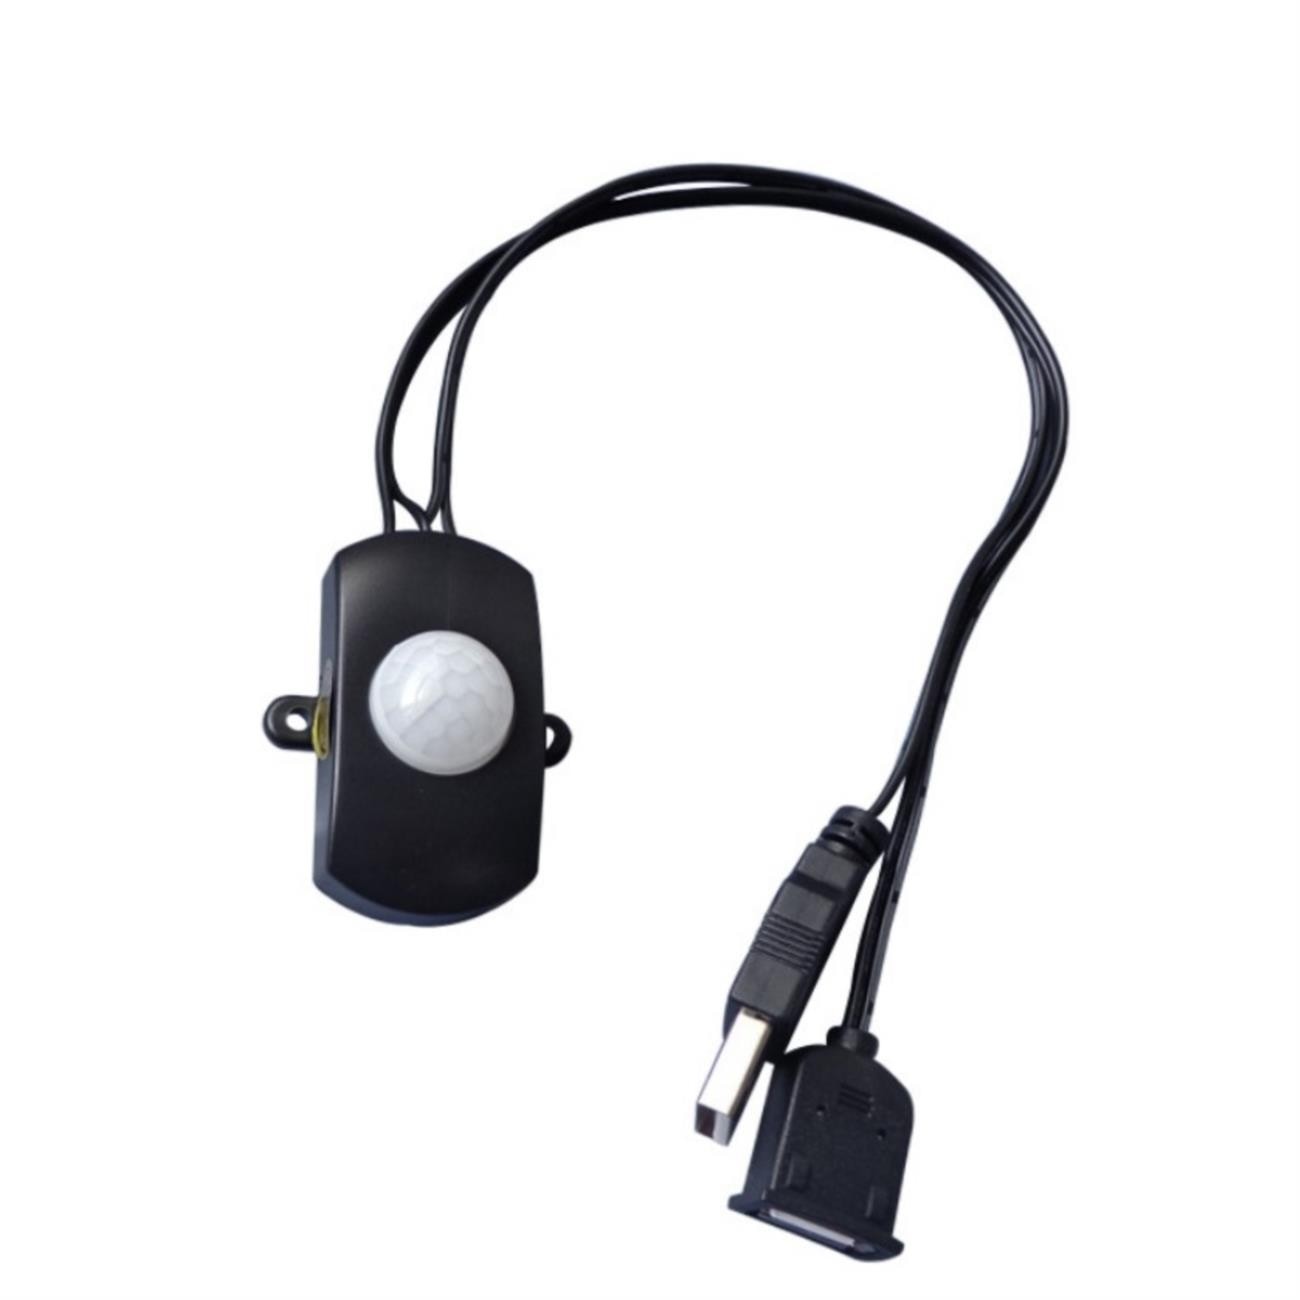 12V PIR Body Infrared Motion Sensor Switch LED Strip Detector Portable Switch Automatic On Off For LED Strip Light Lamp